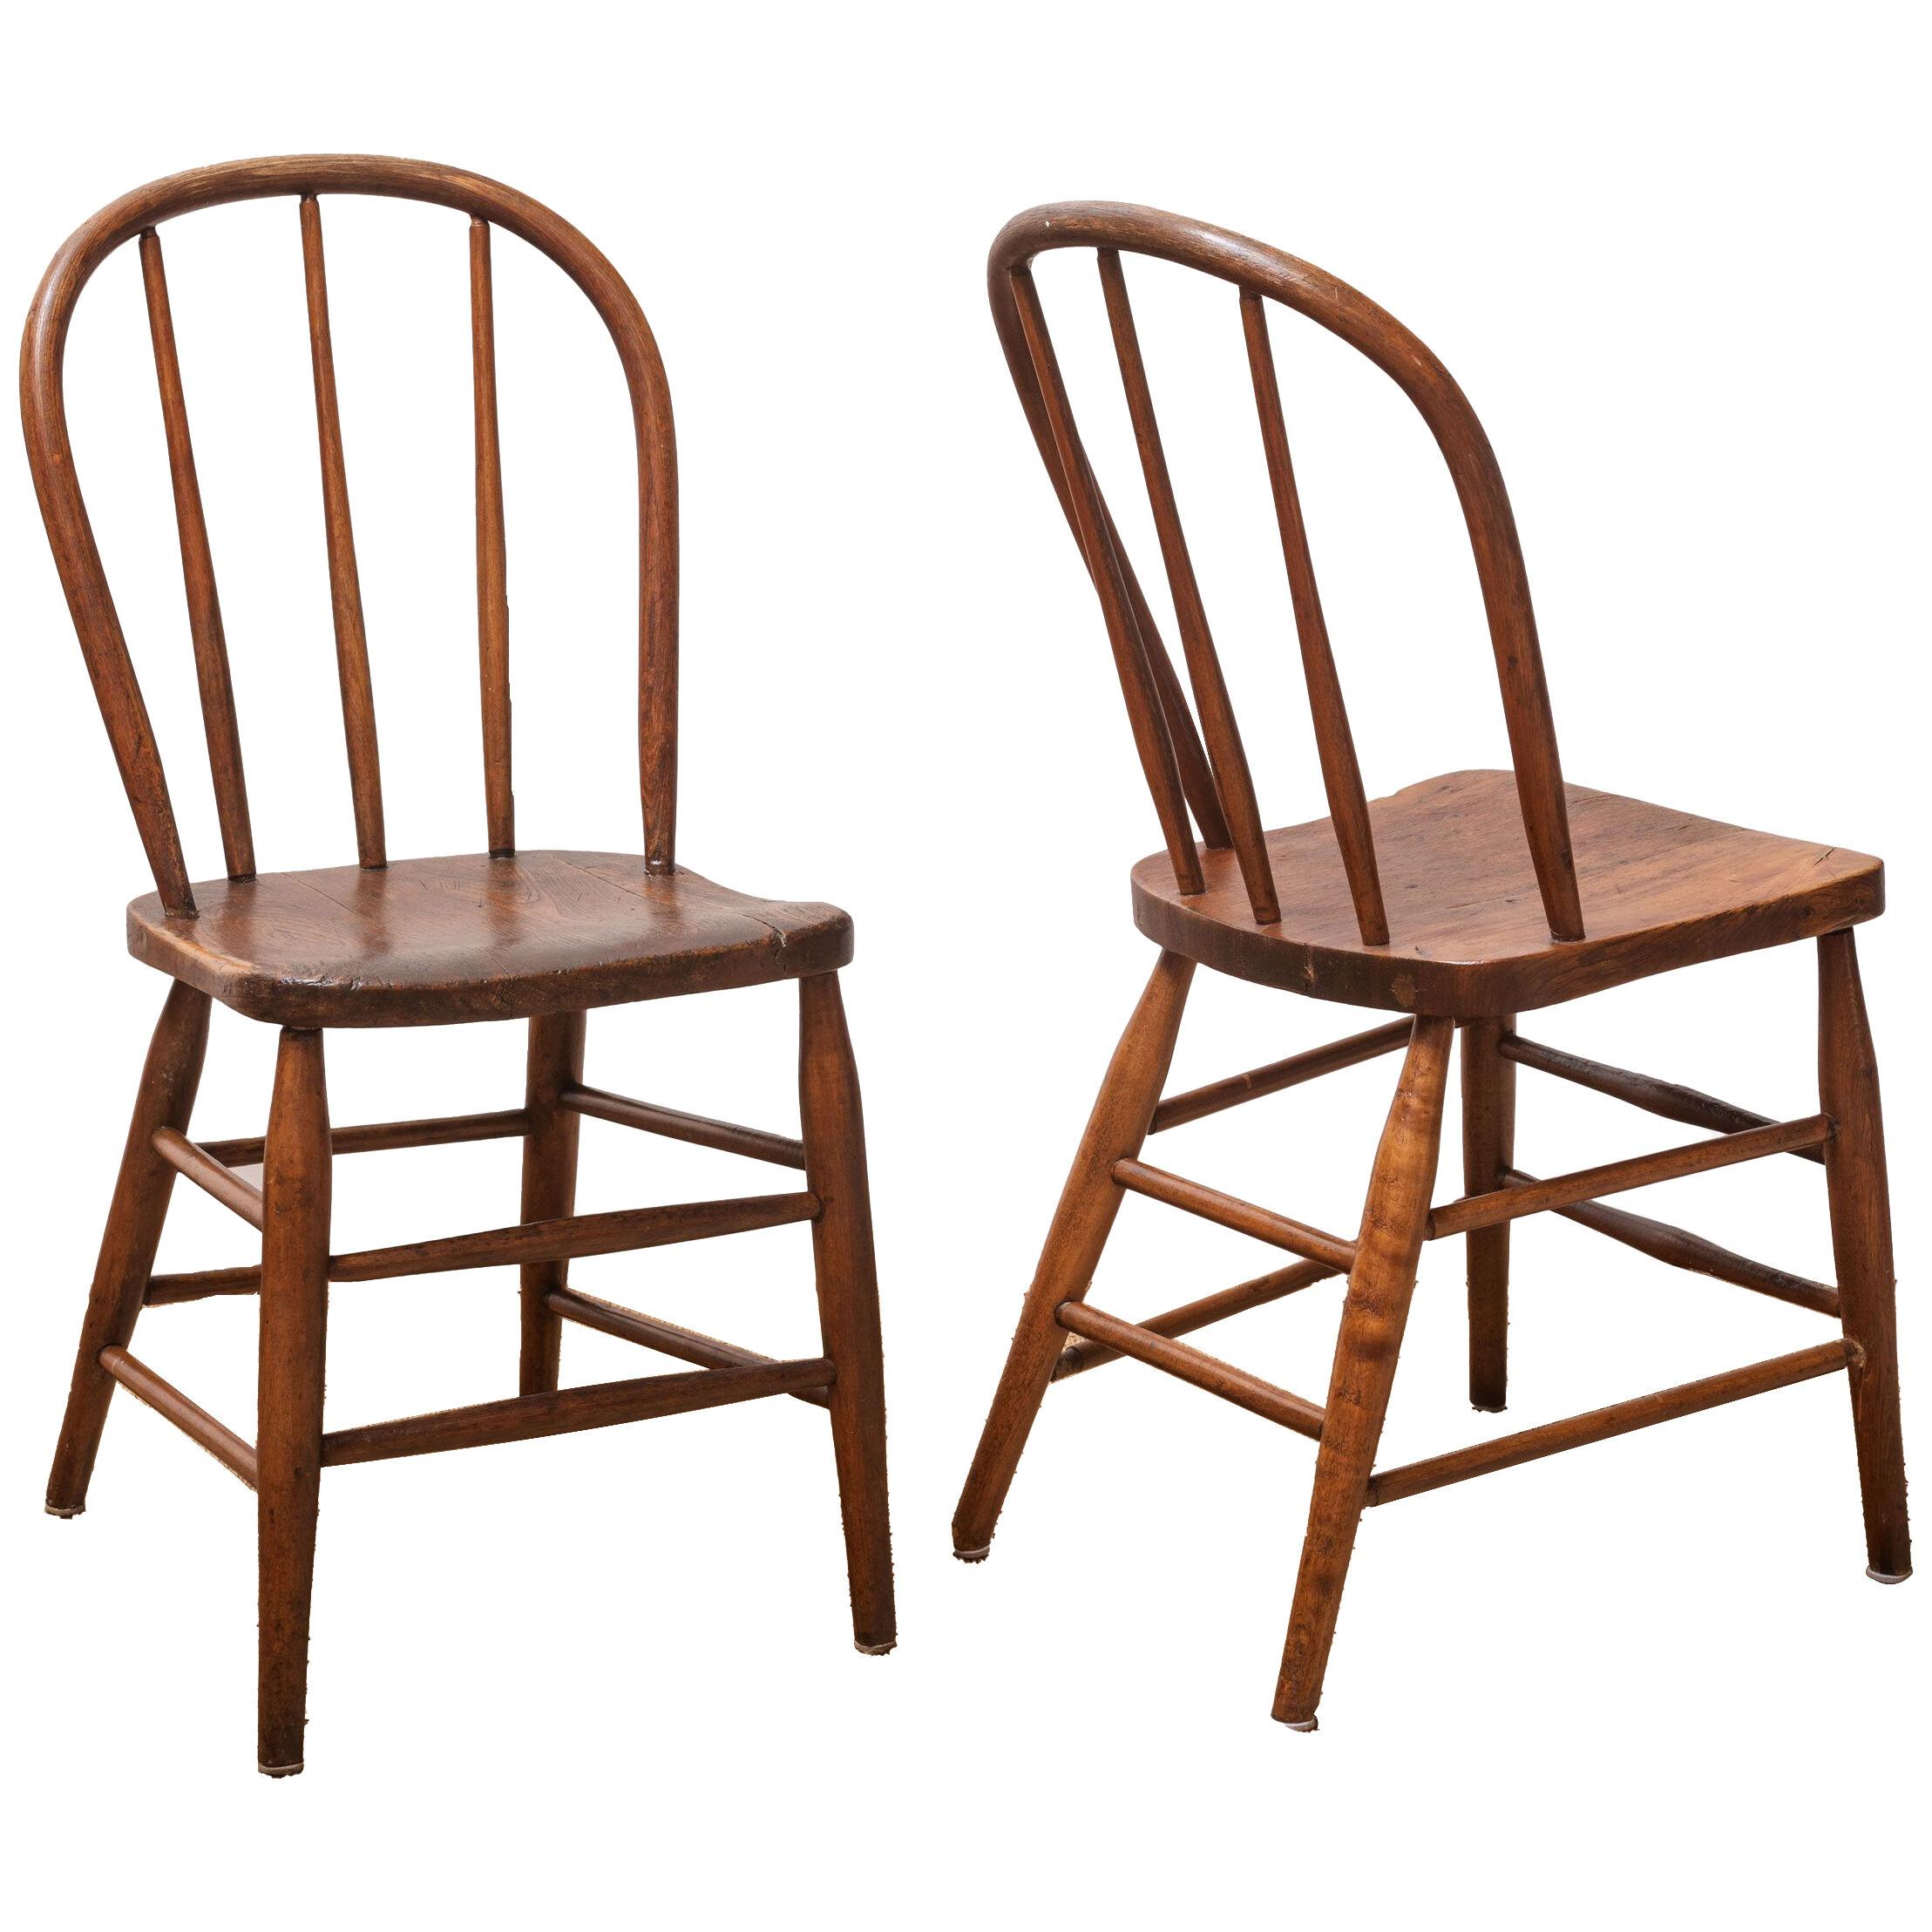 Primitive Windsor Chairs